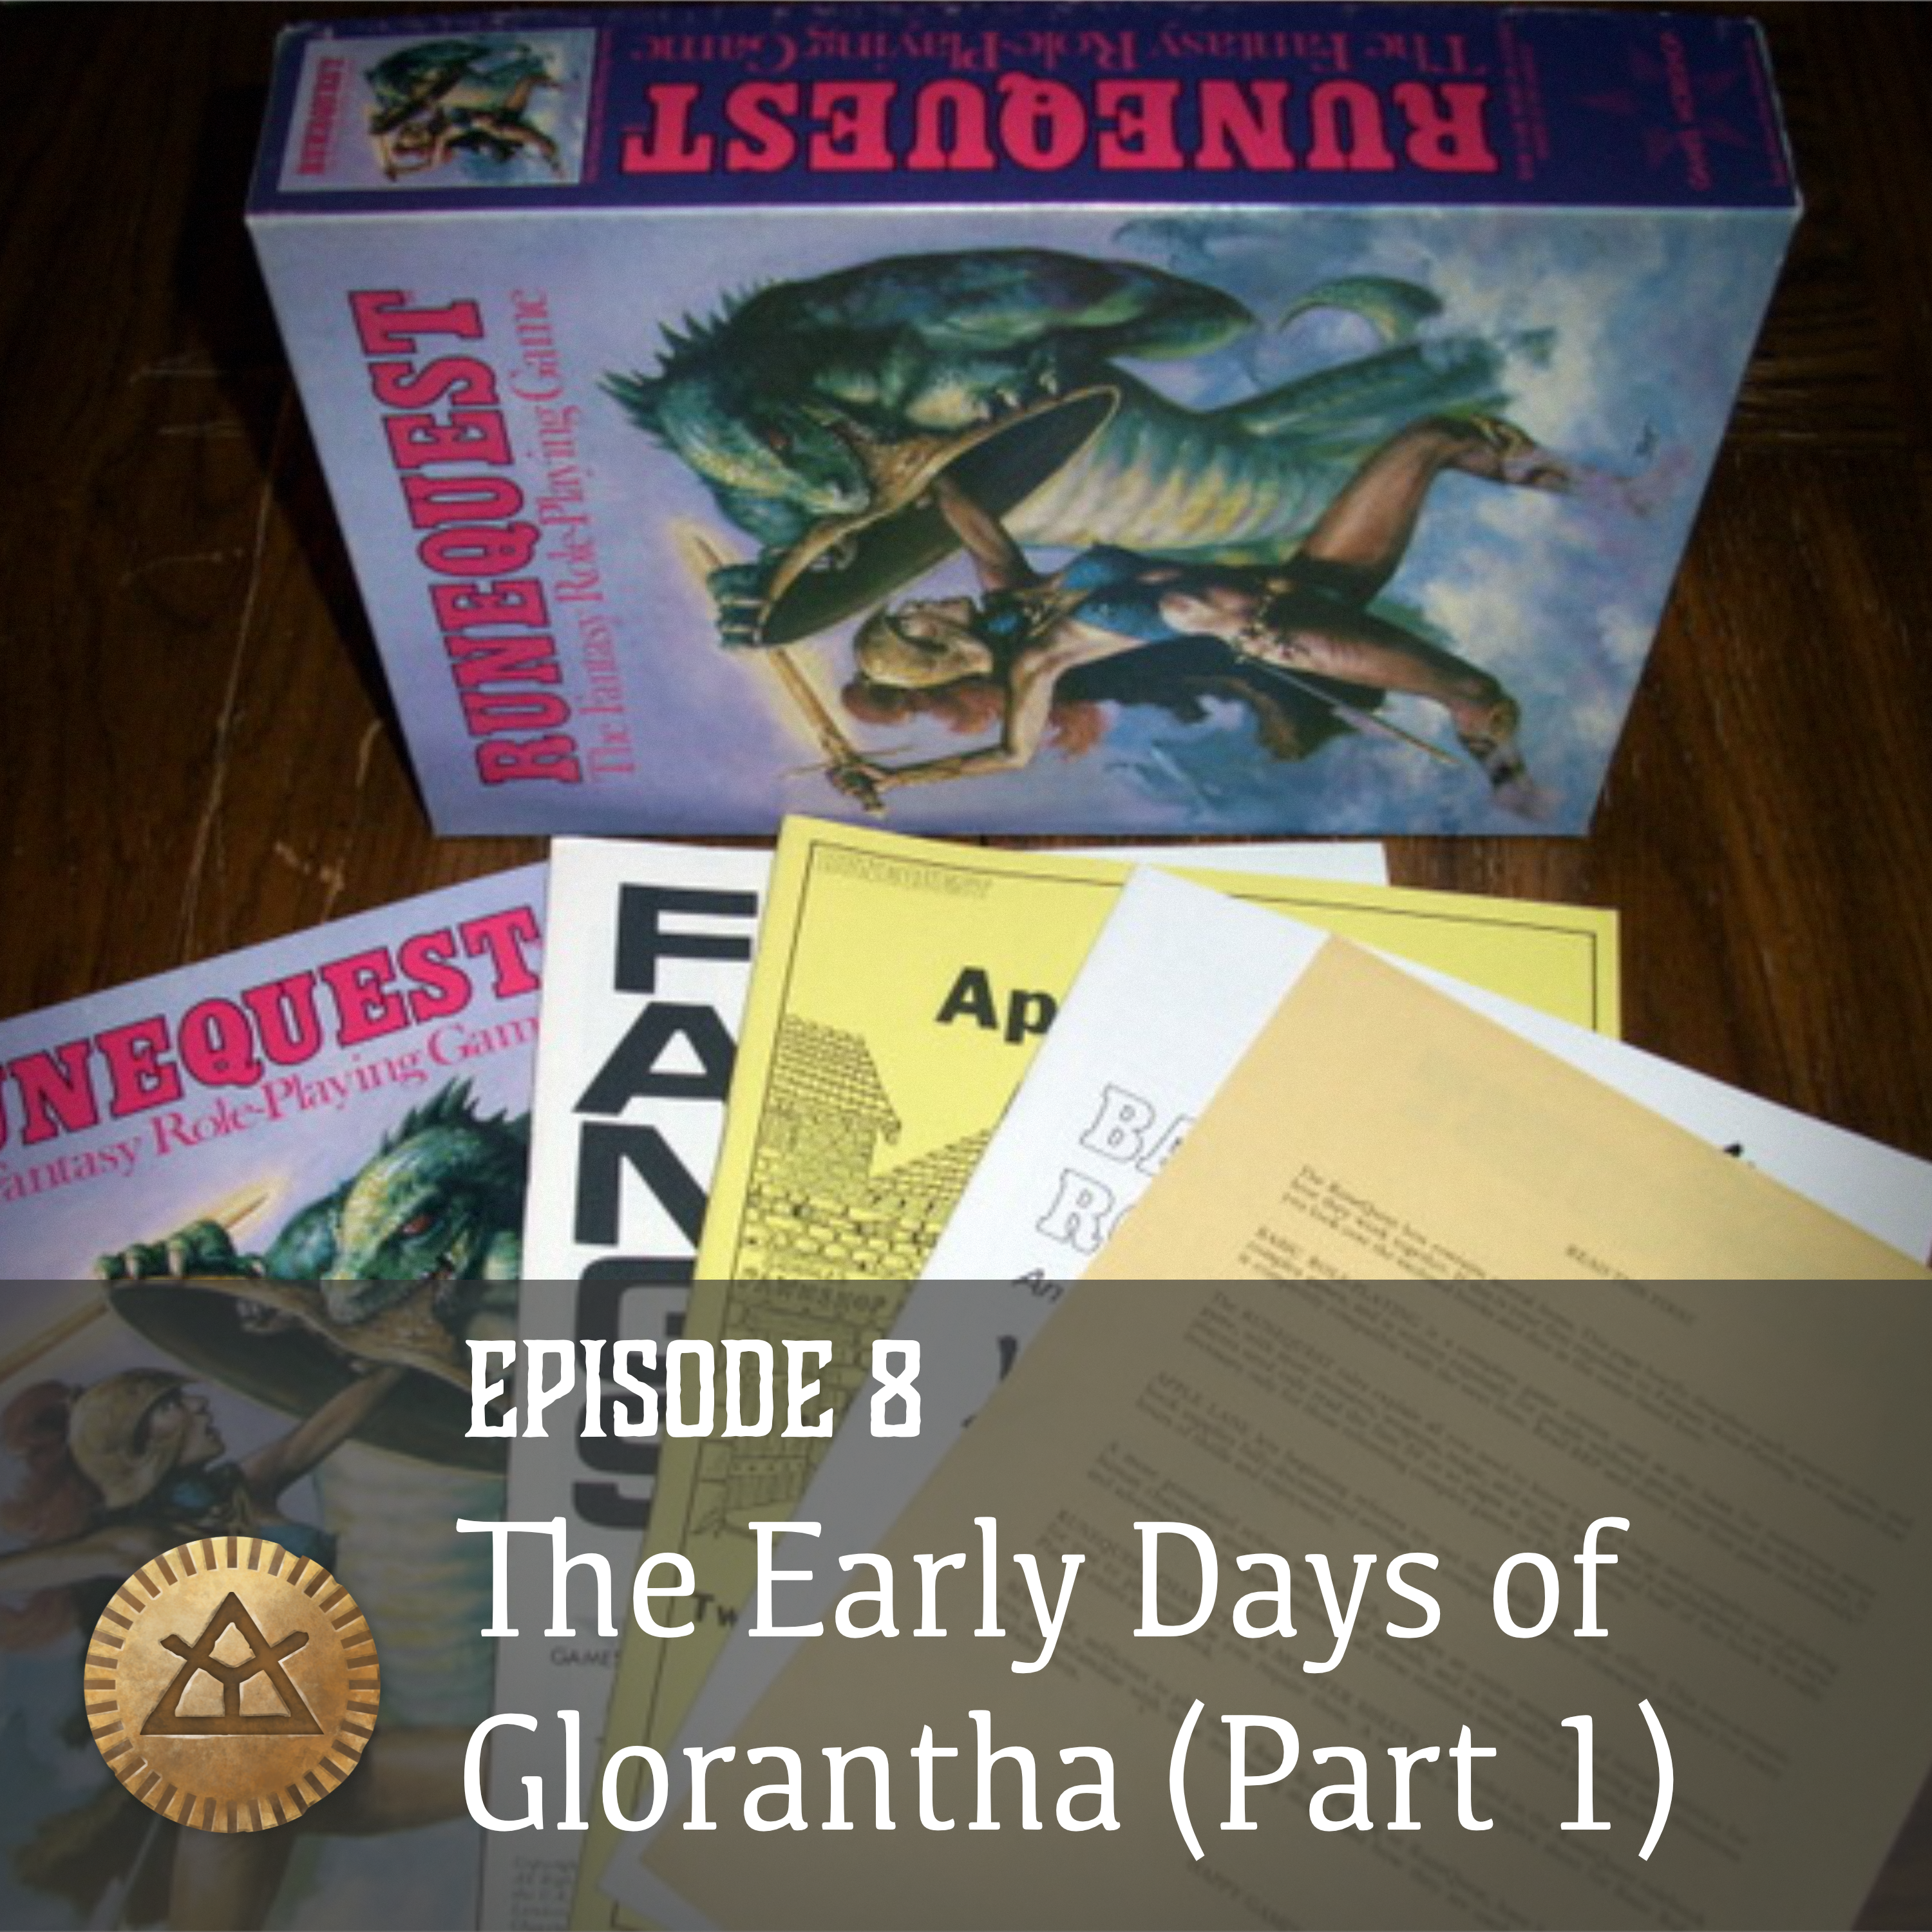 Episode 8: The Early Days of Glorantha (Part 1)